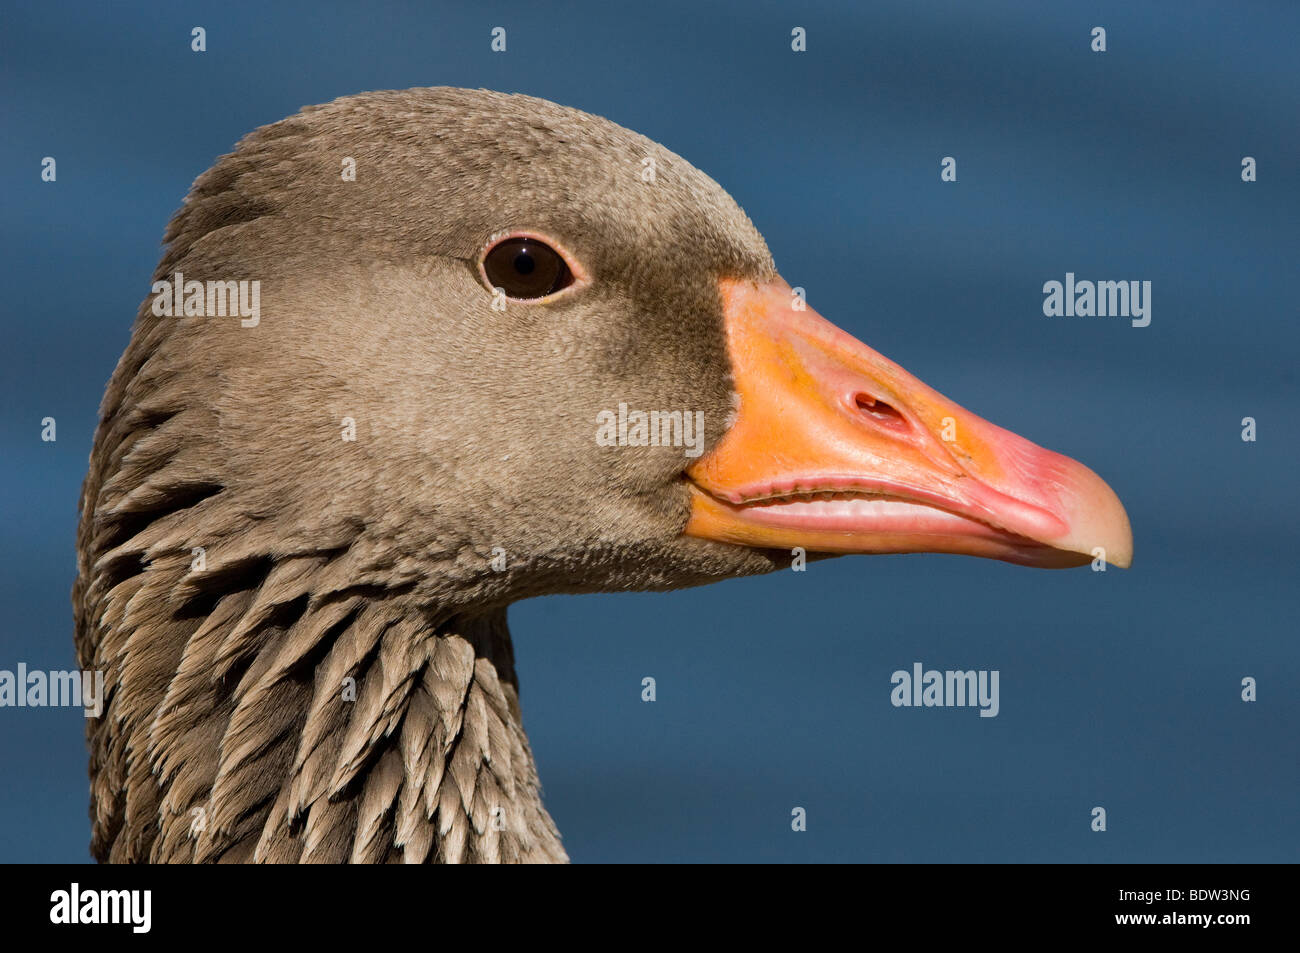 Portrait of a greylag goose Stock Photo